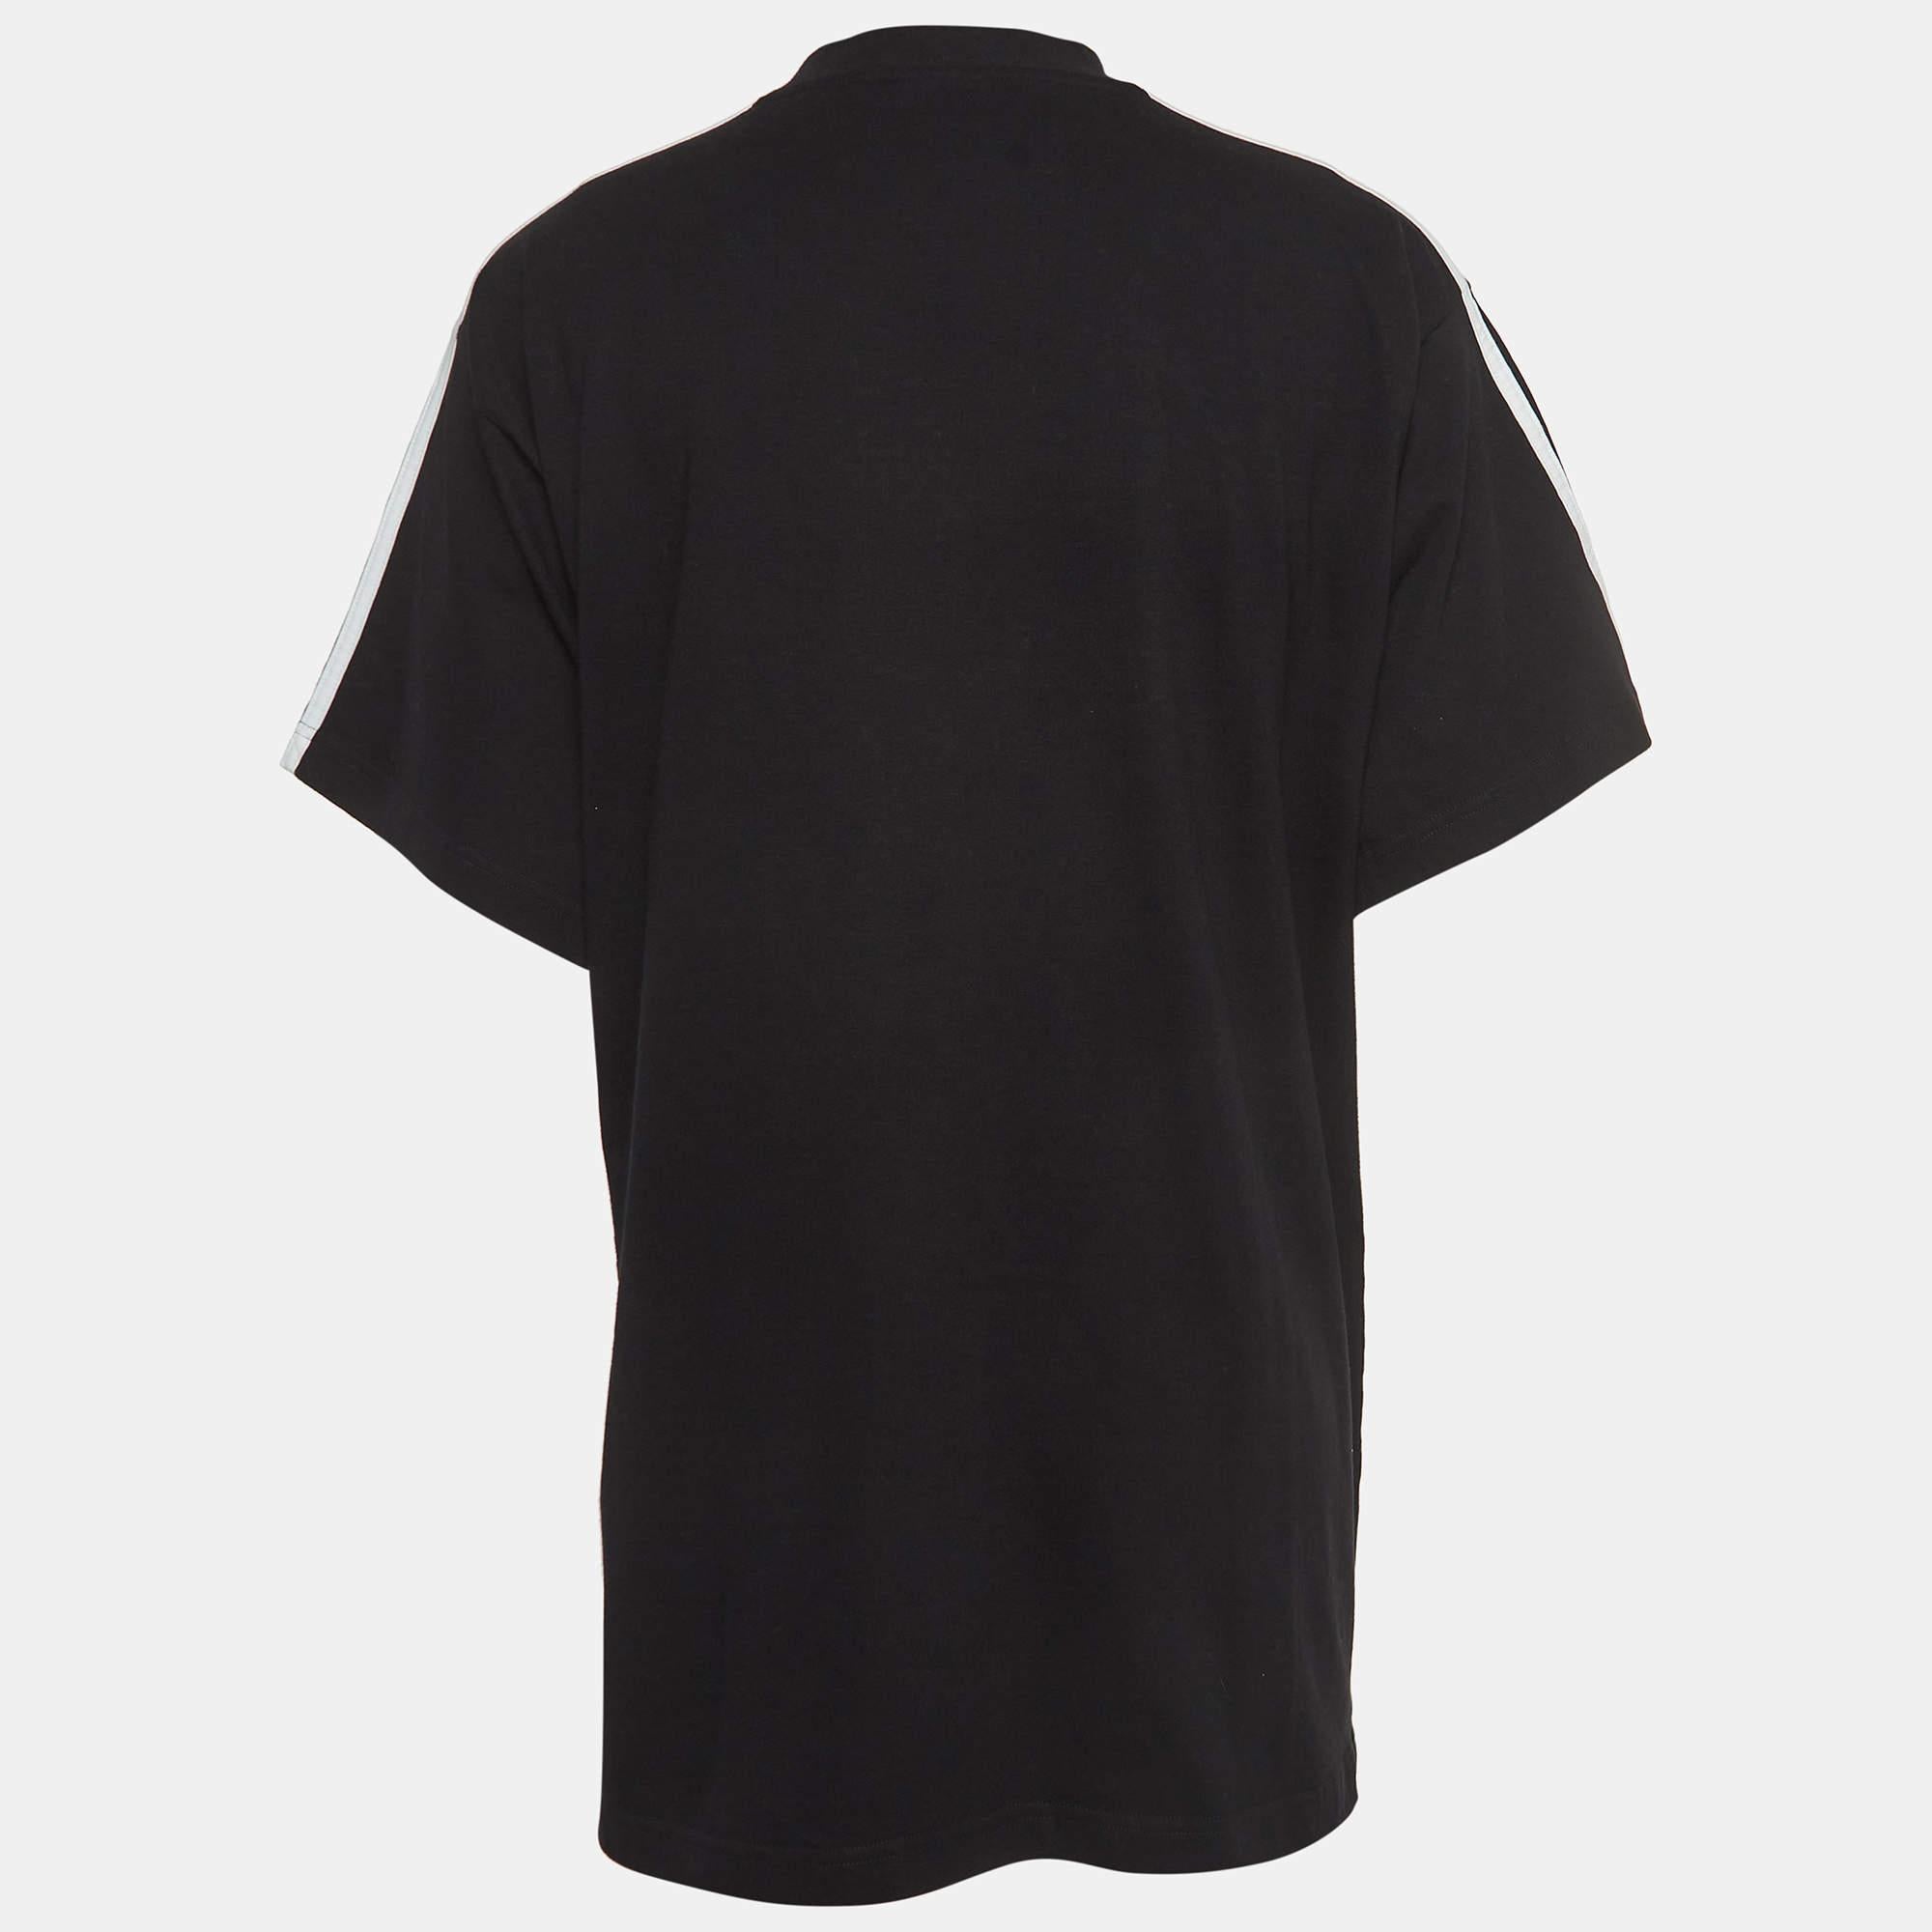 Perfect for casual outings or errands, this T-shirt is the best piece to feel comfortable and stylish in. It flaunts a catchy shade and a relaxed fit.

Includes: Brand Tag